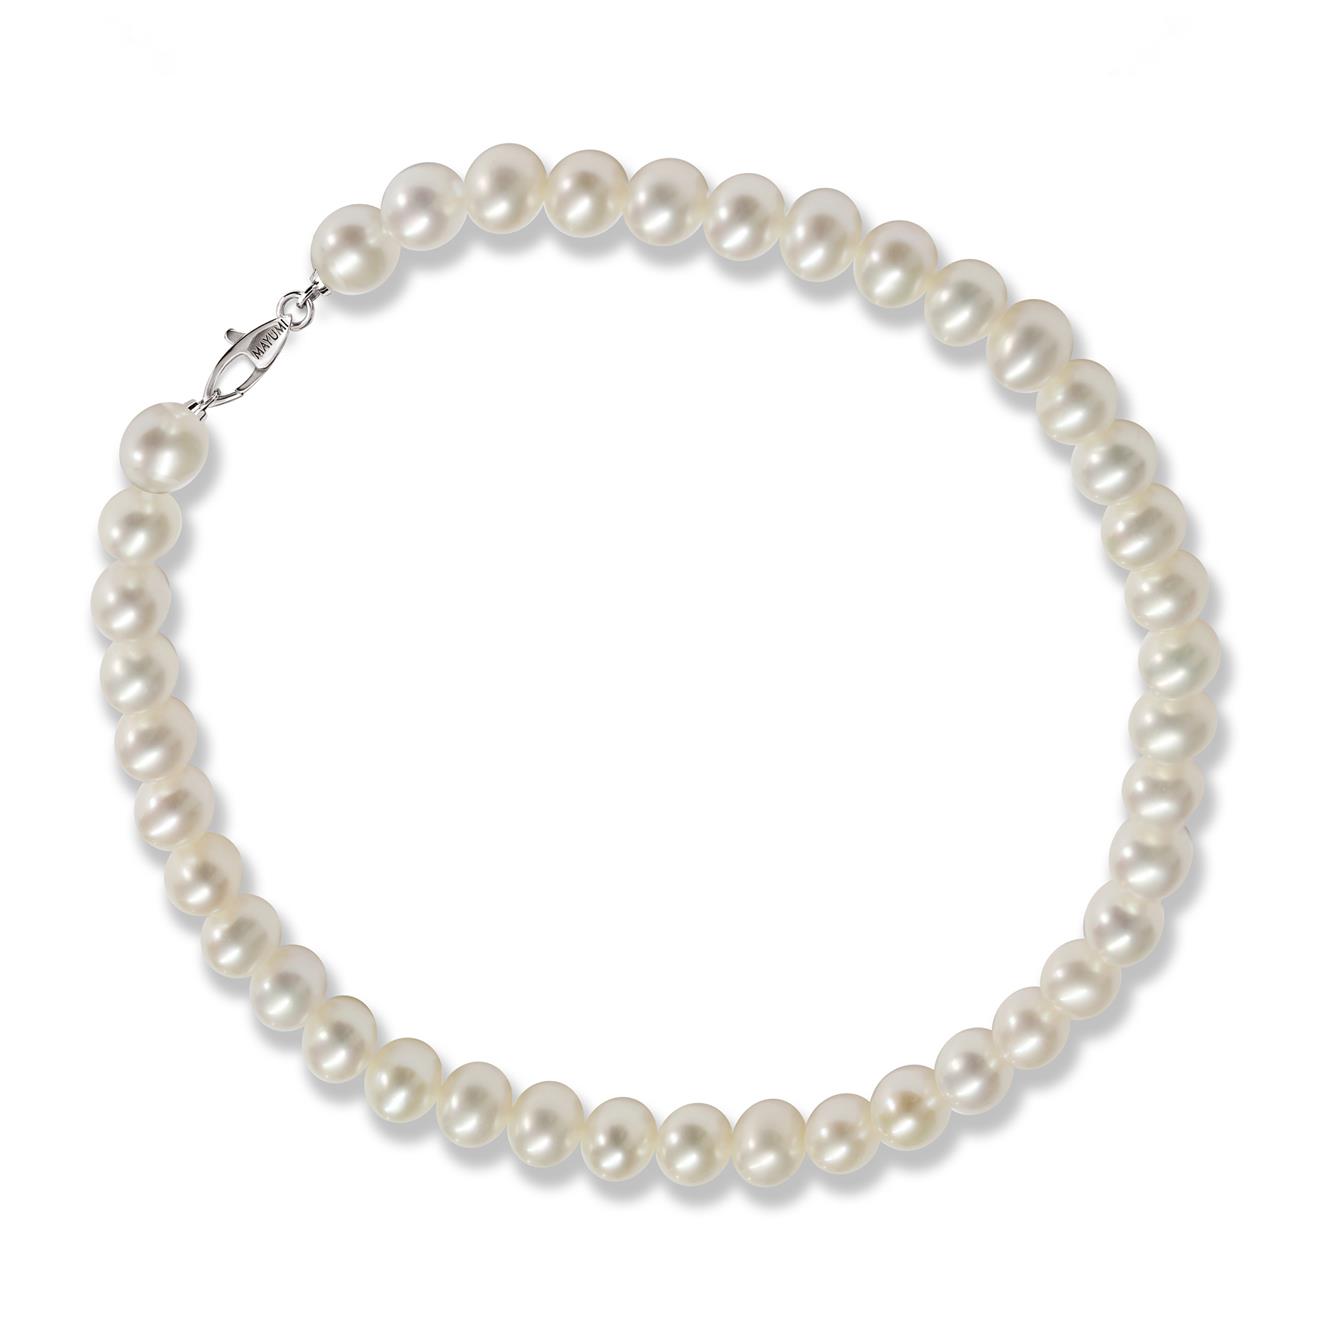 18kt white gold bracelet with full pearlescent pearls - MAYUMI